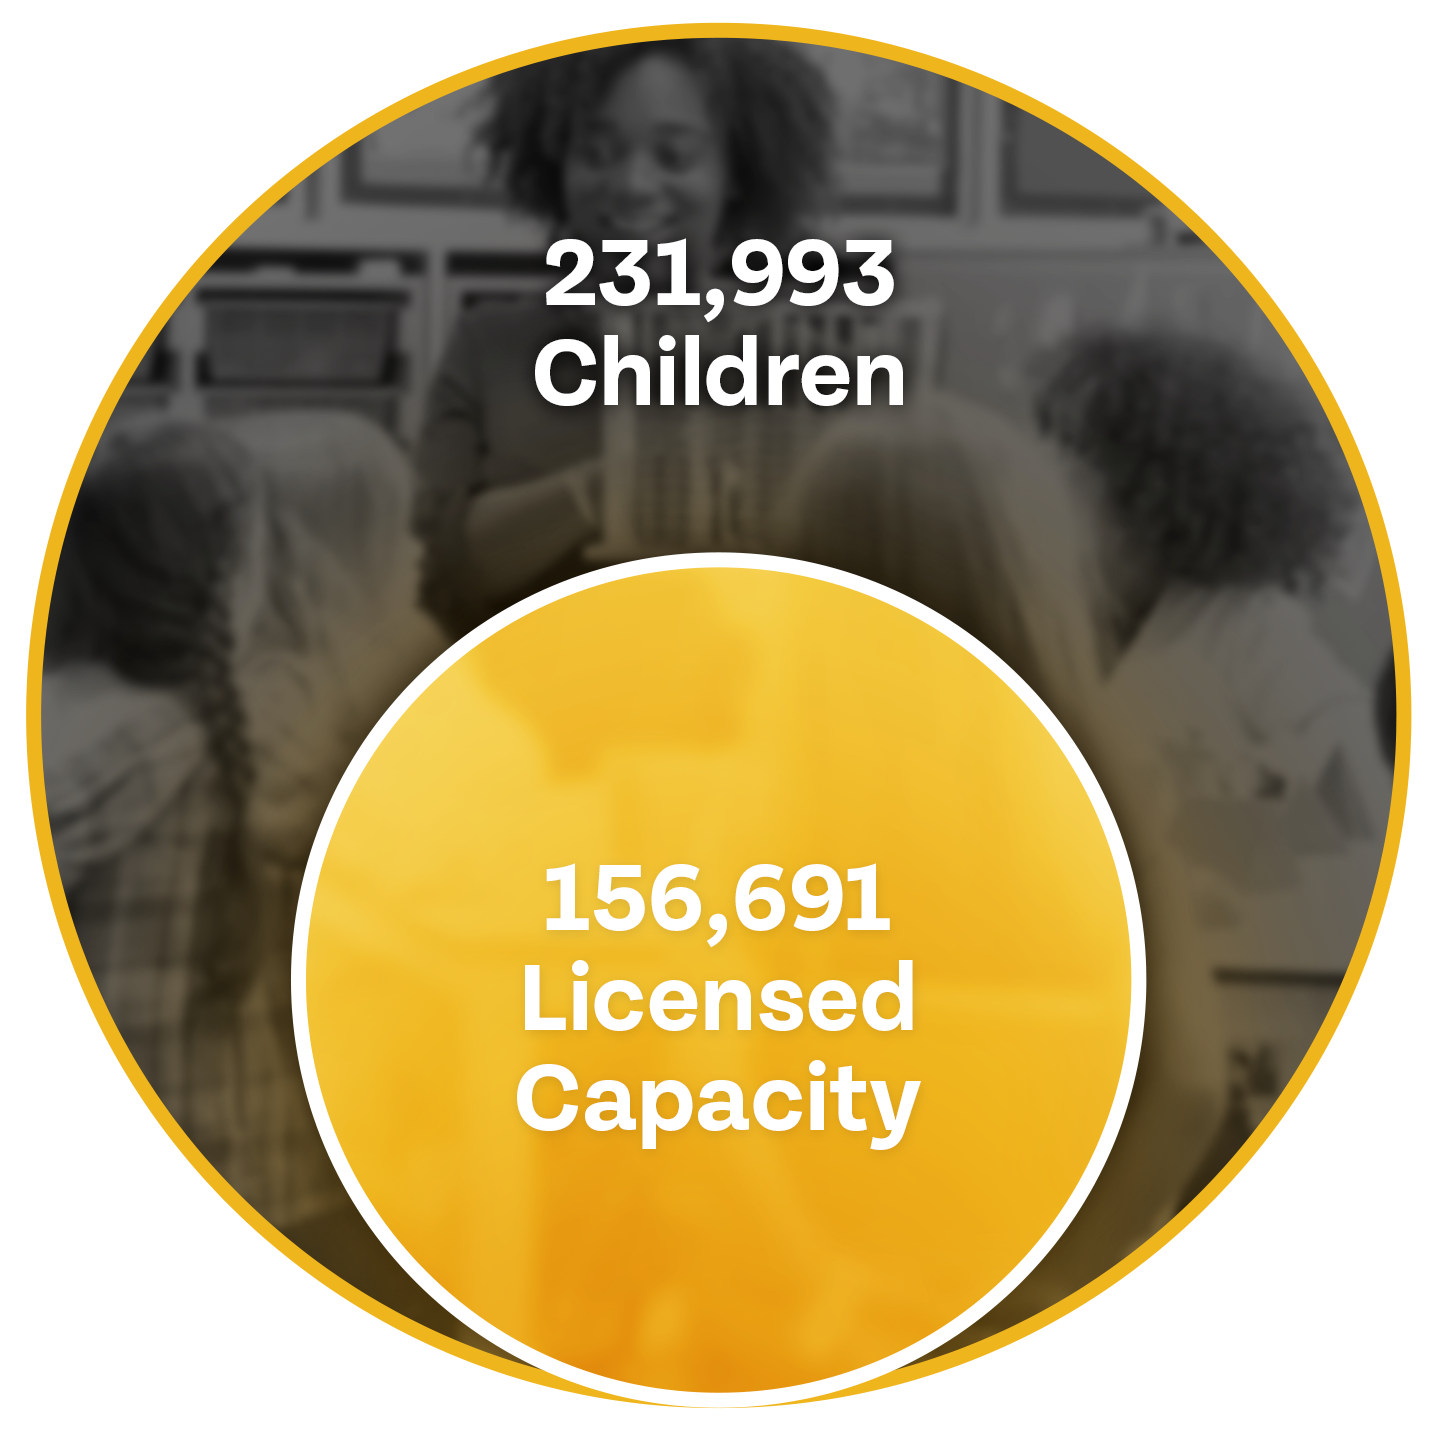 Circle graph contrasting amount of Licensed Capacity (156,691) to Children who need care (231,993)